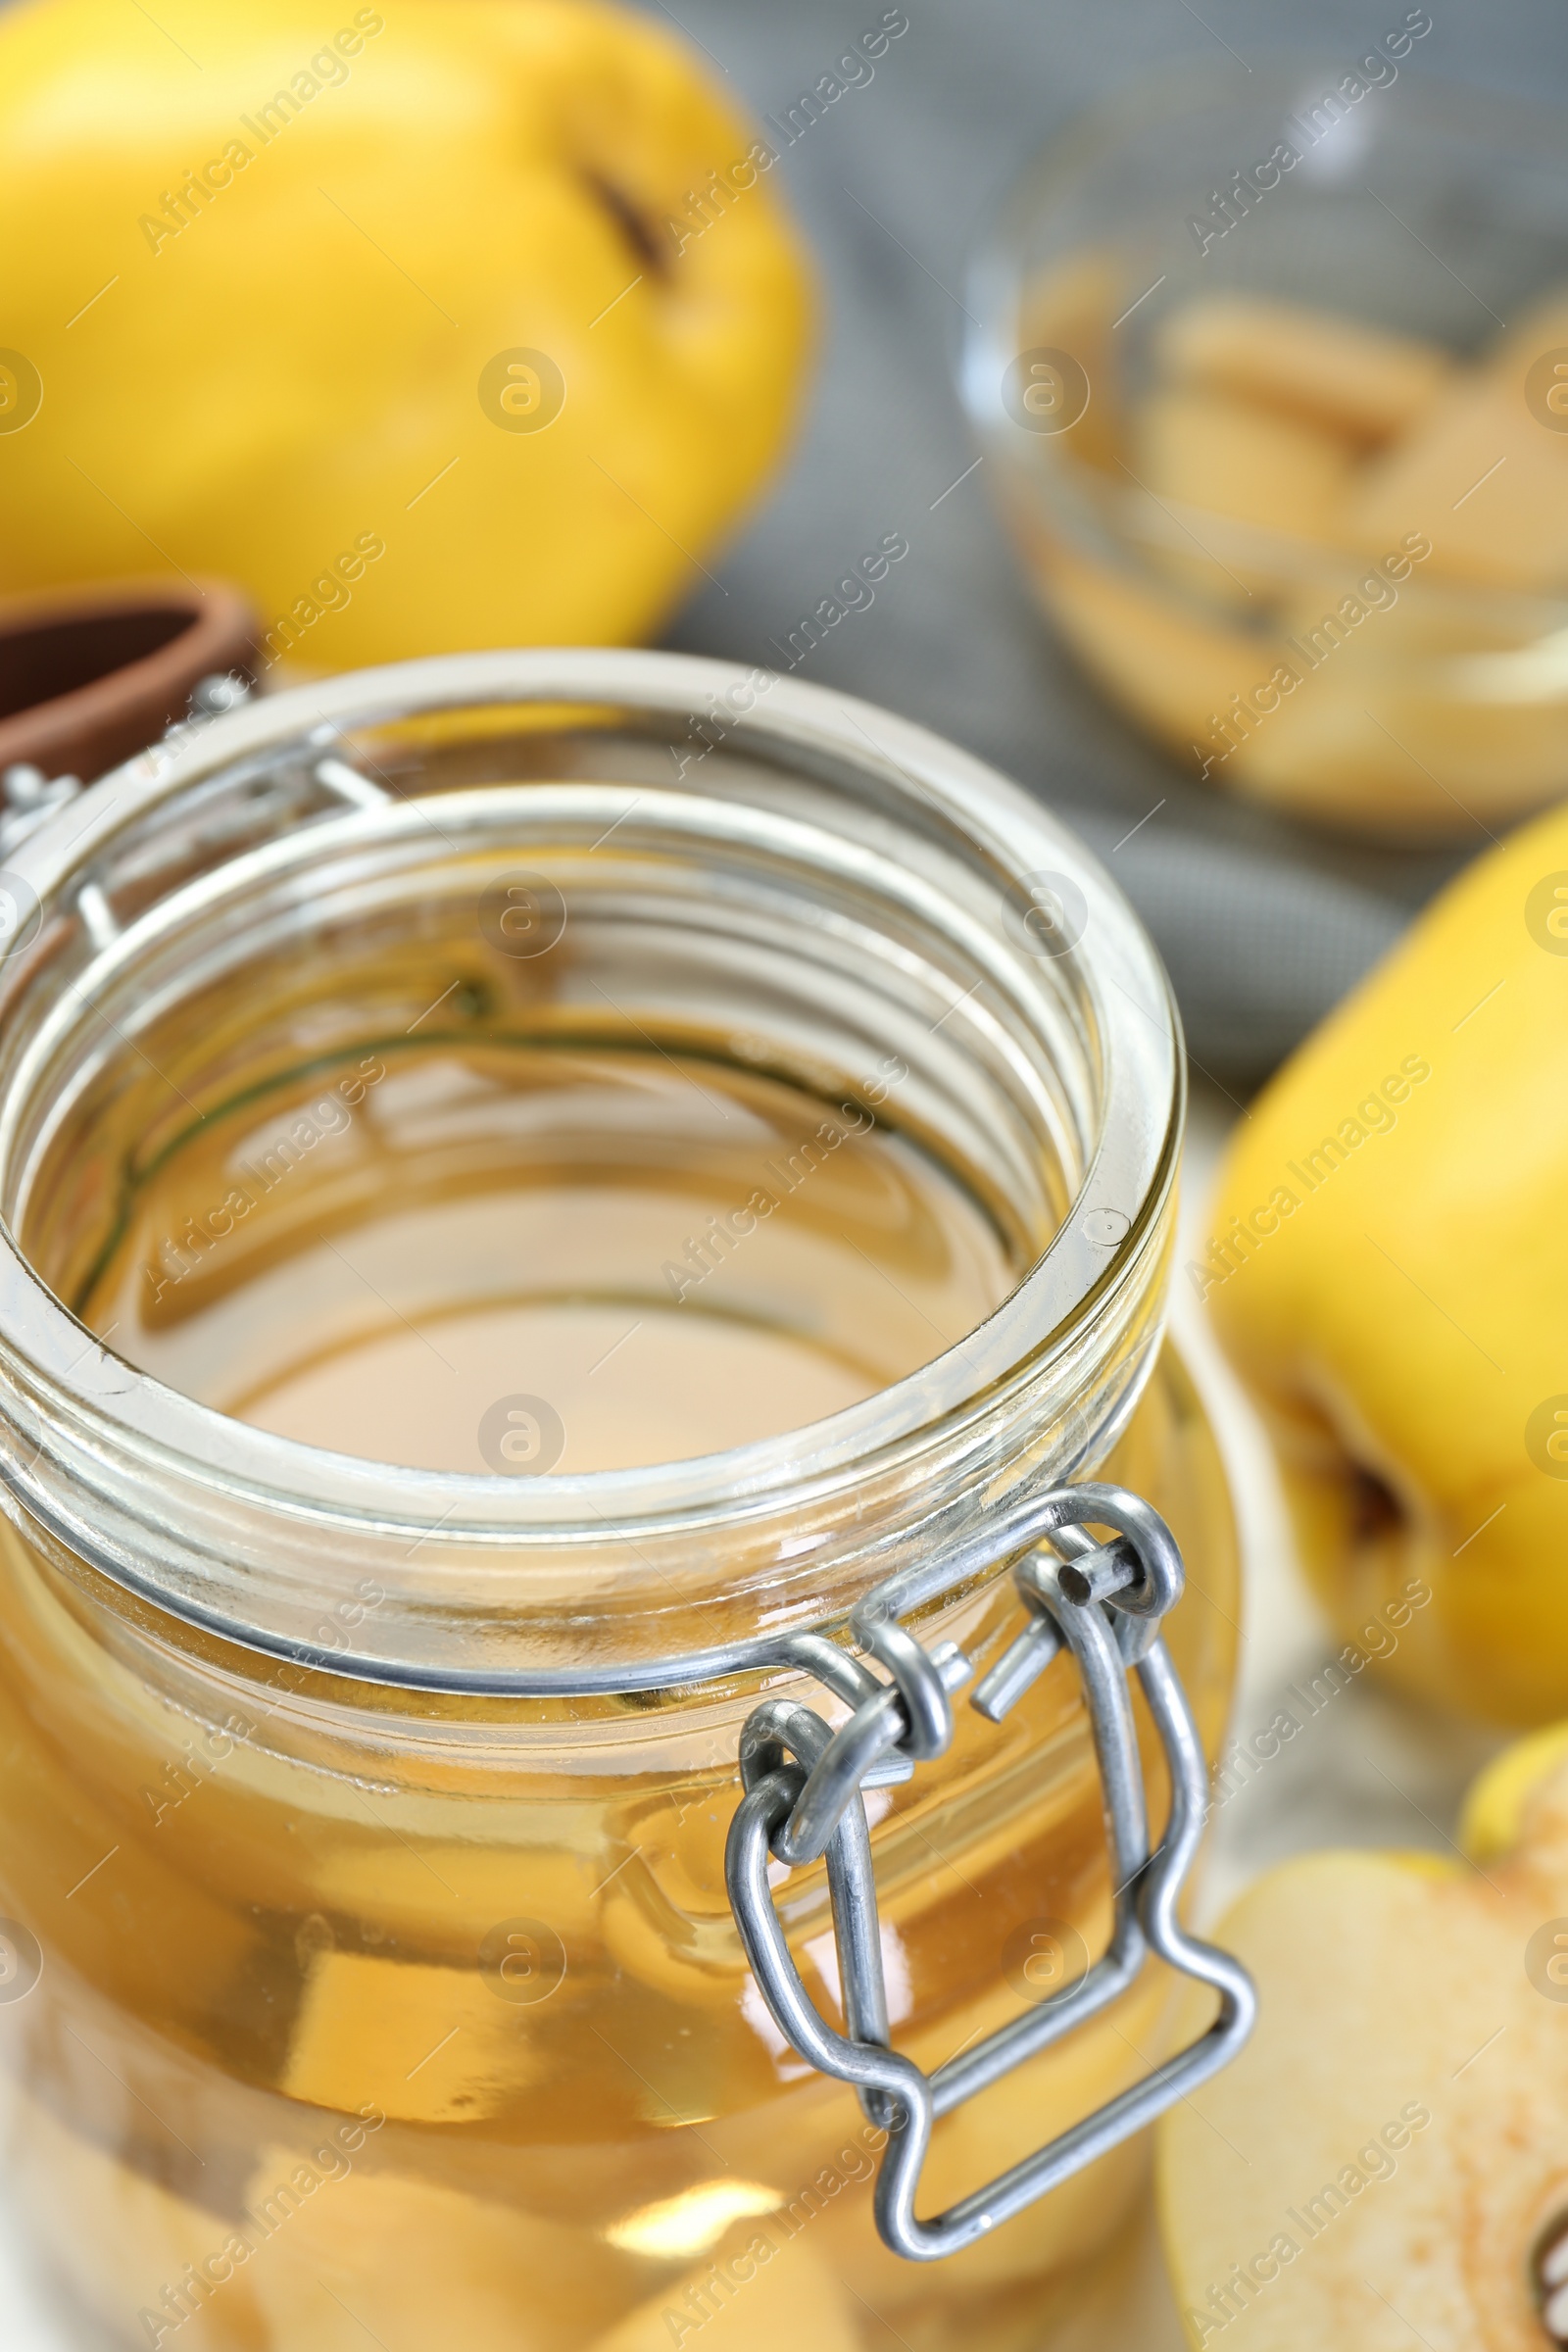 Photo of Delicious quince drink in jar, closeup view